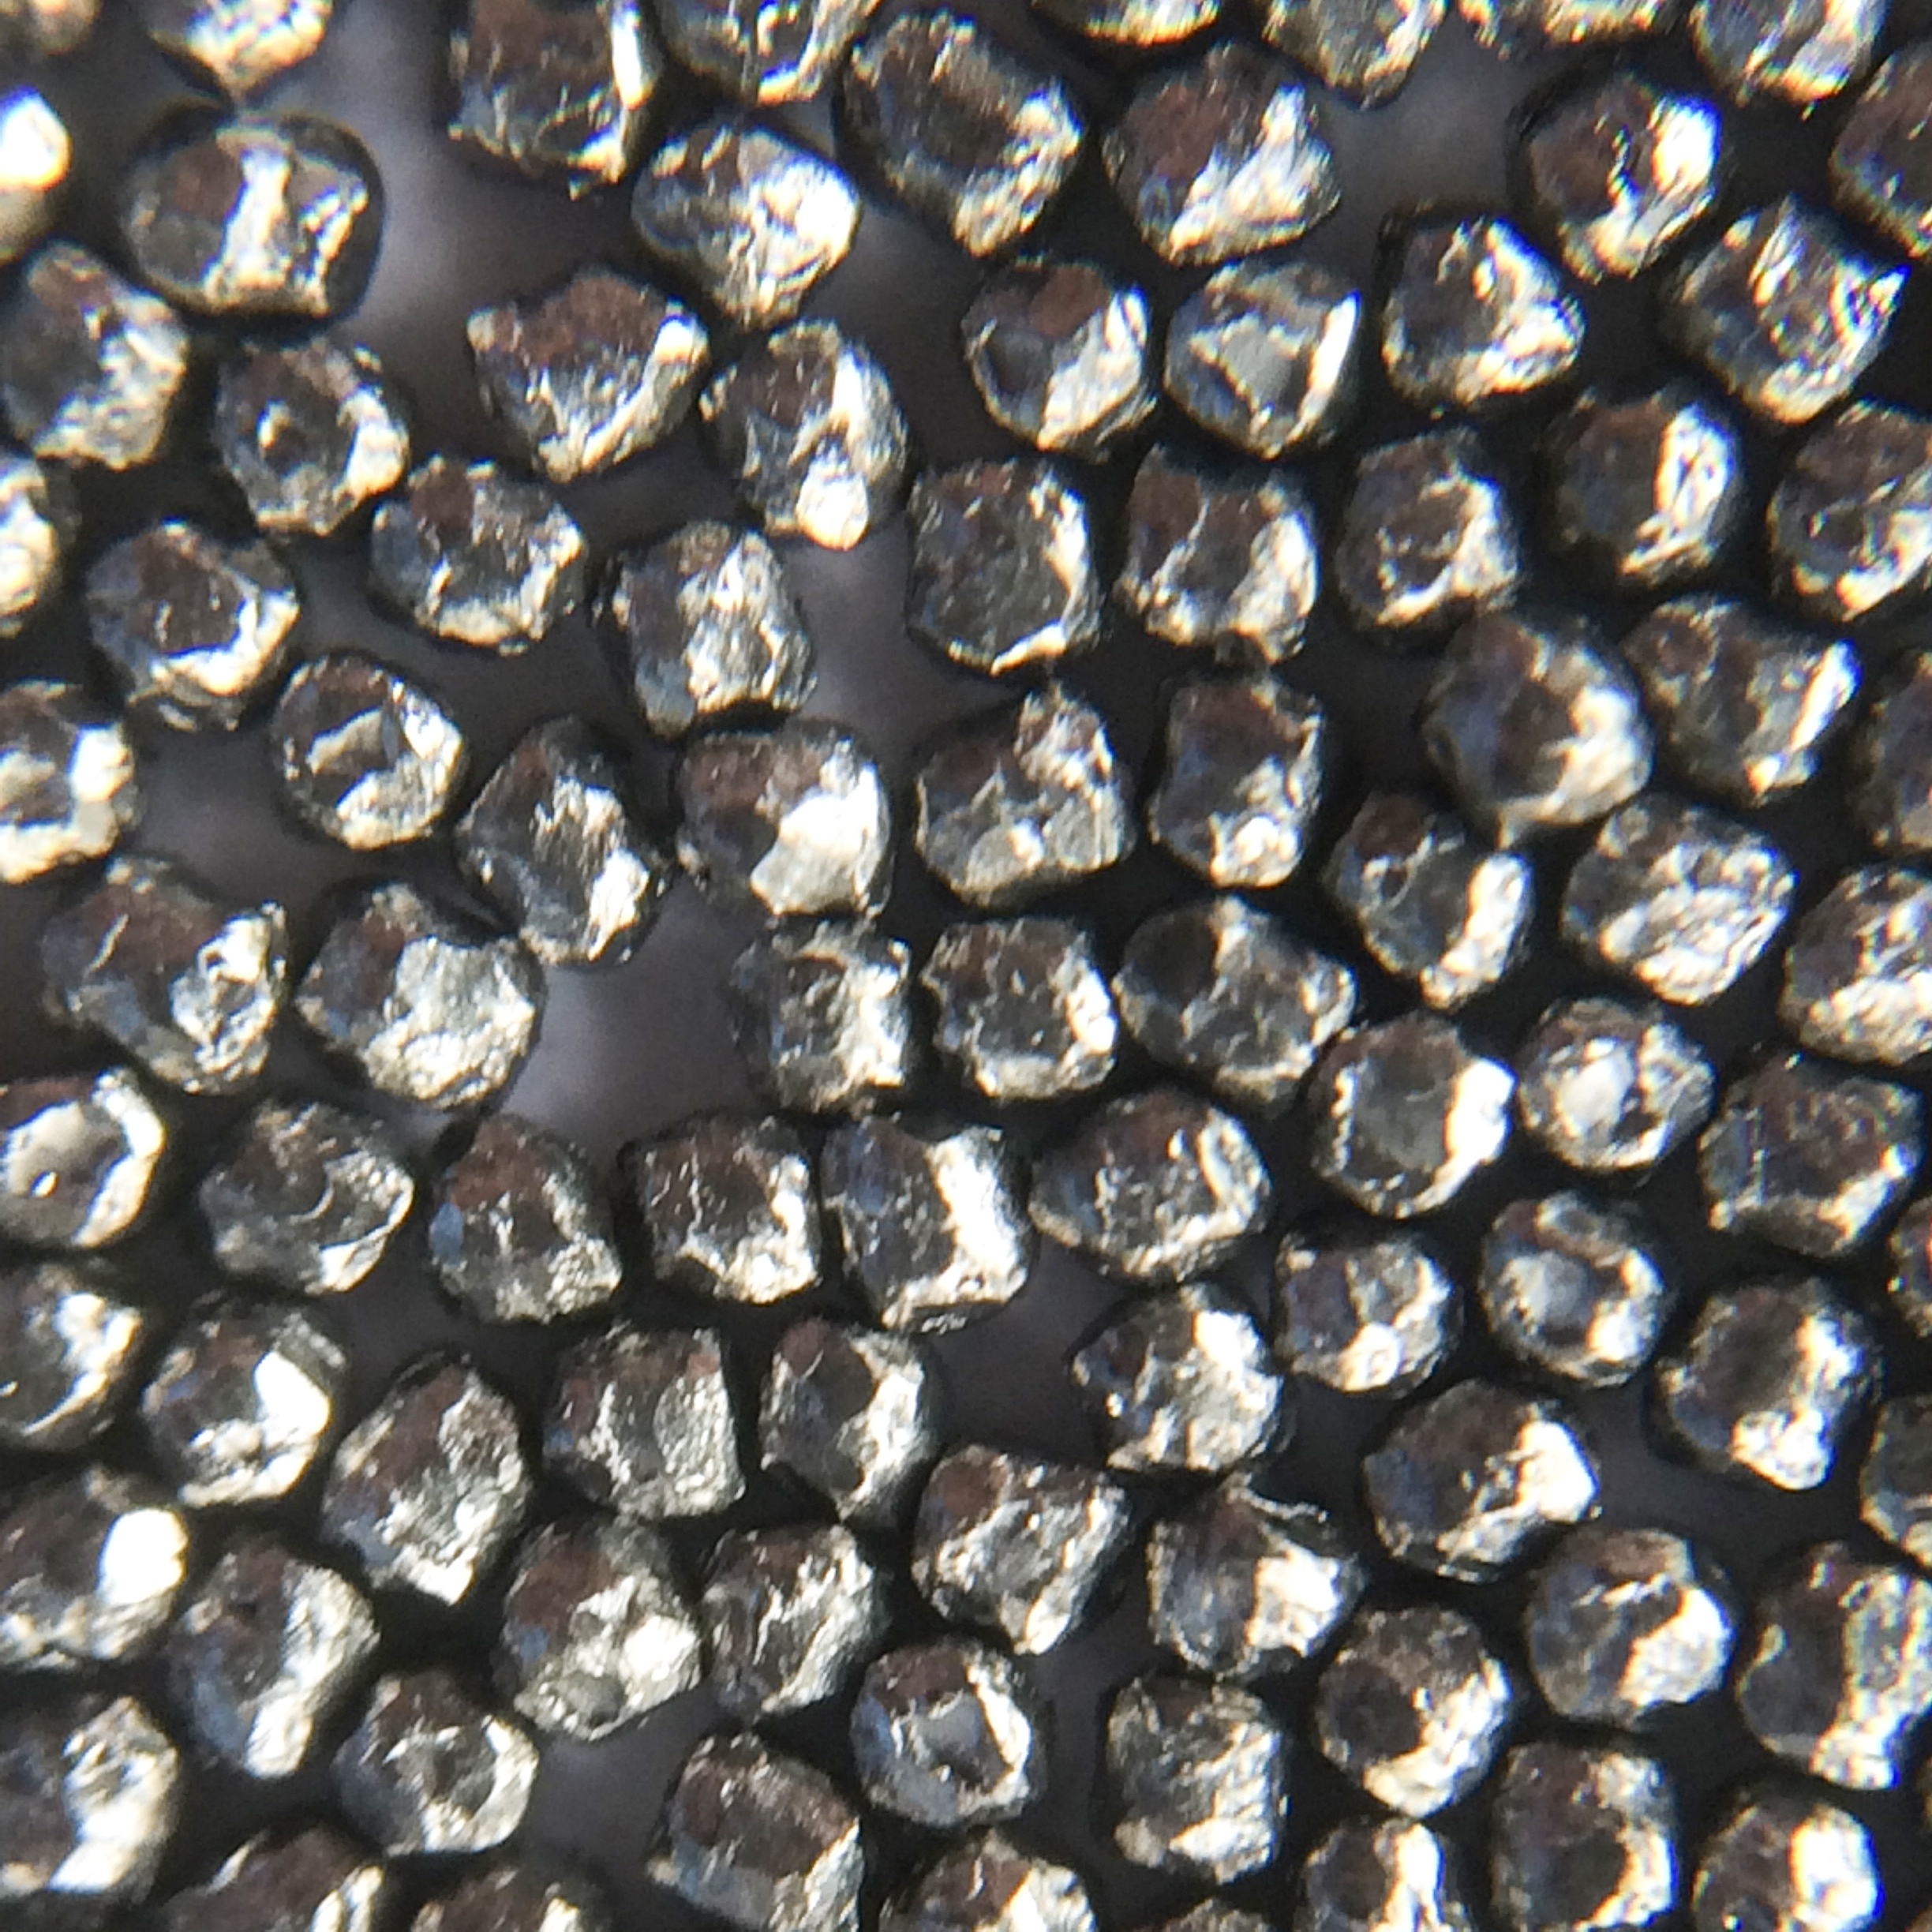 Carbon steel cut wire shot for cleaning and peening